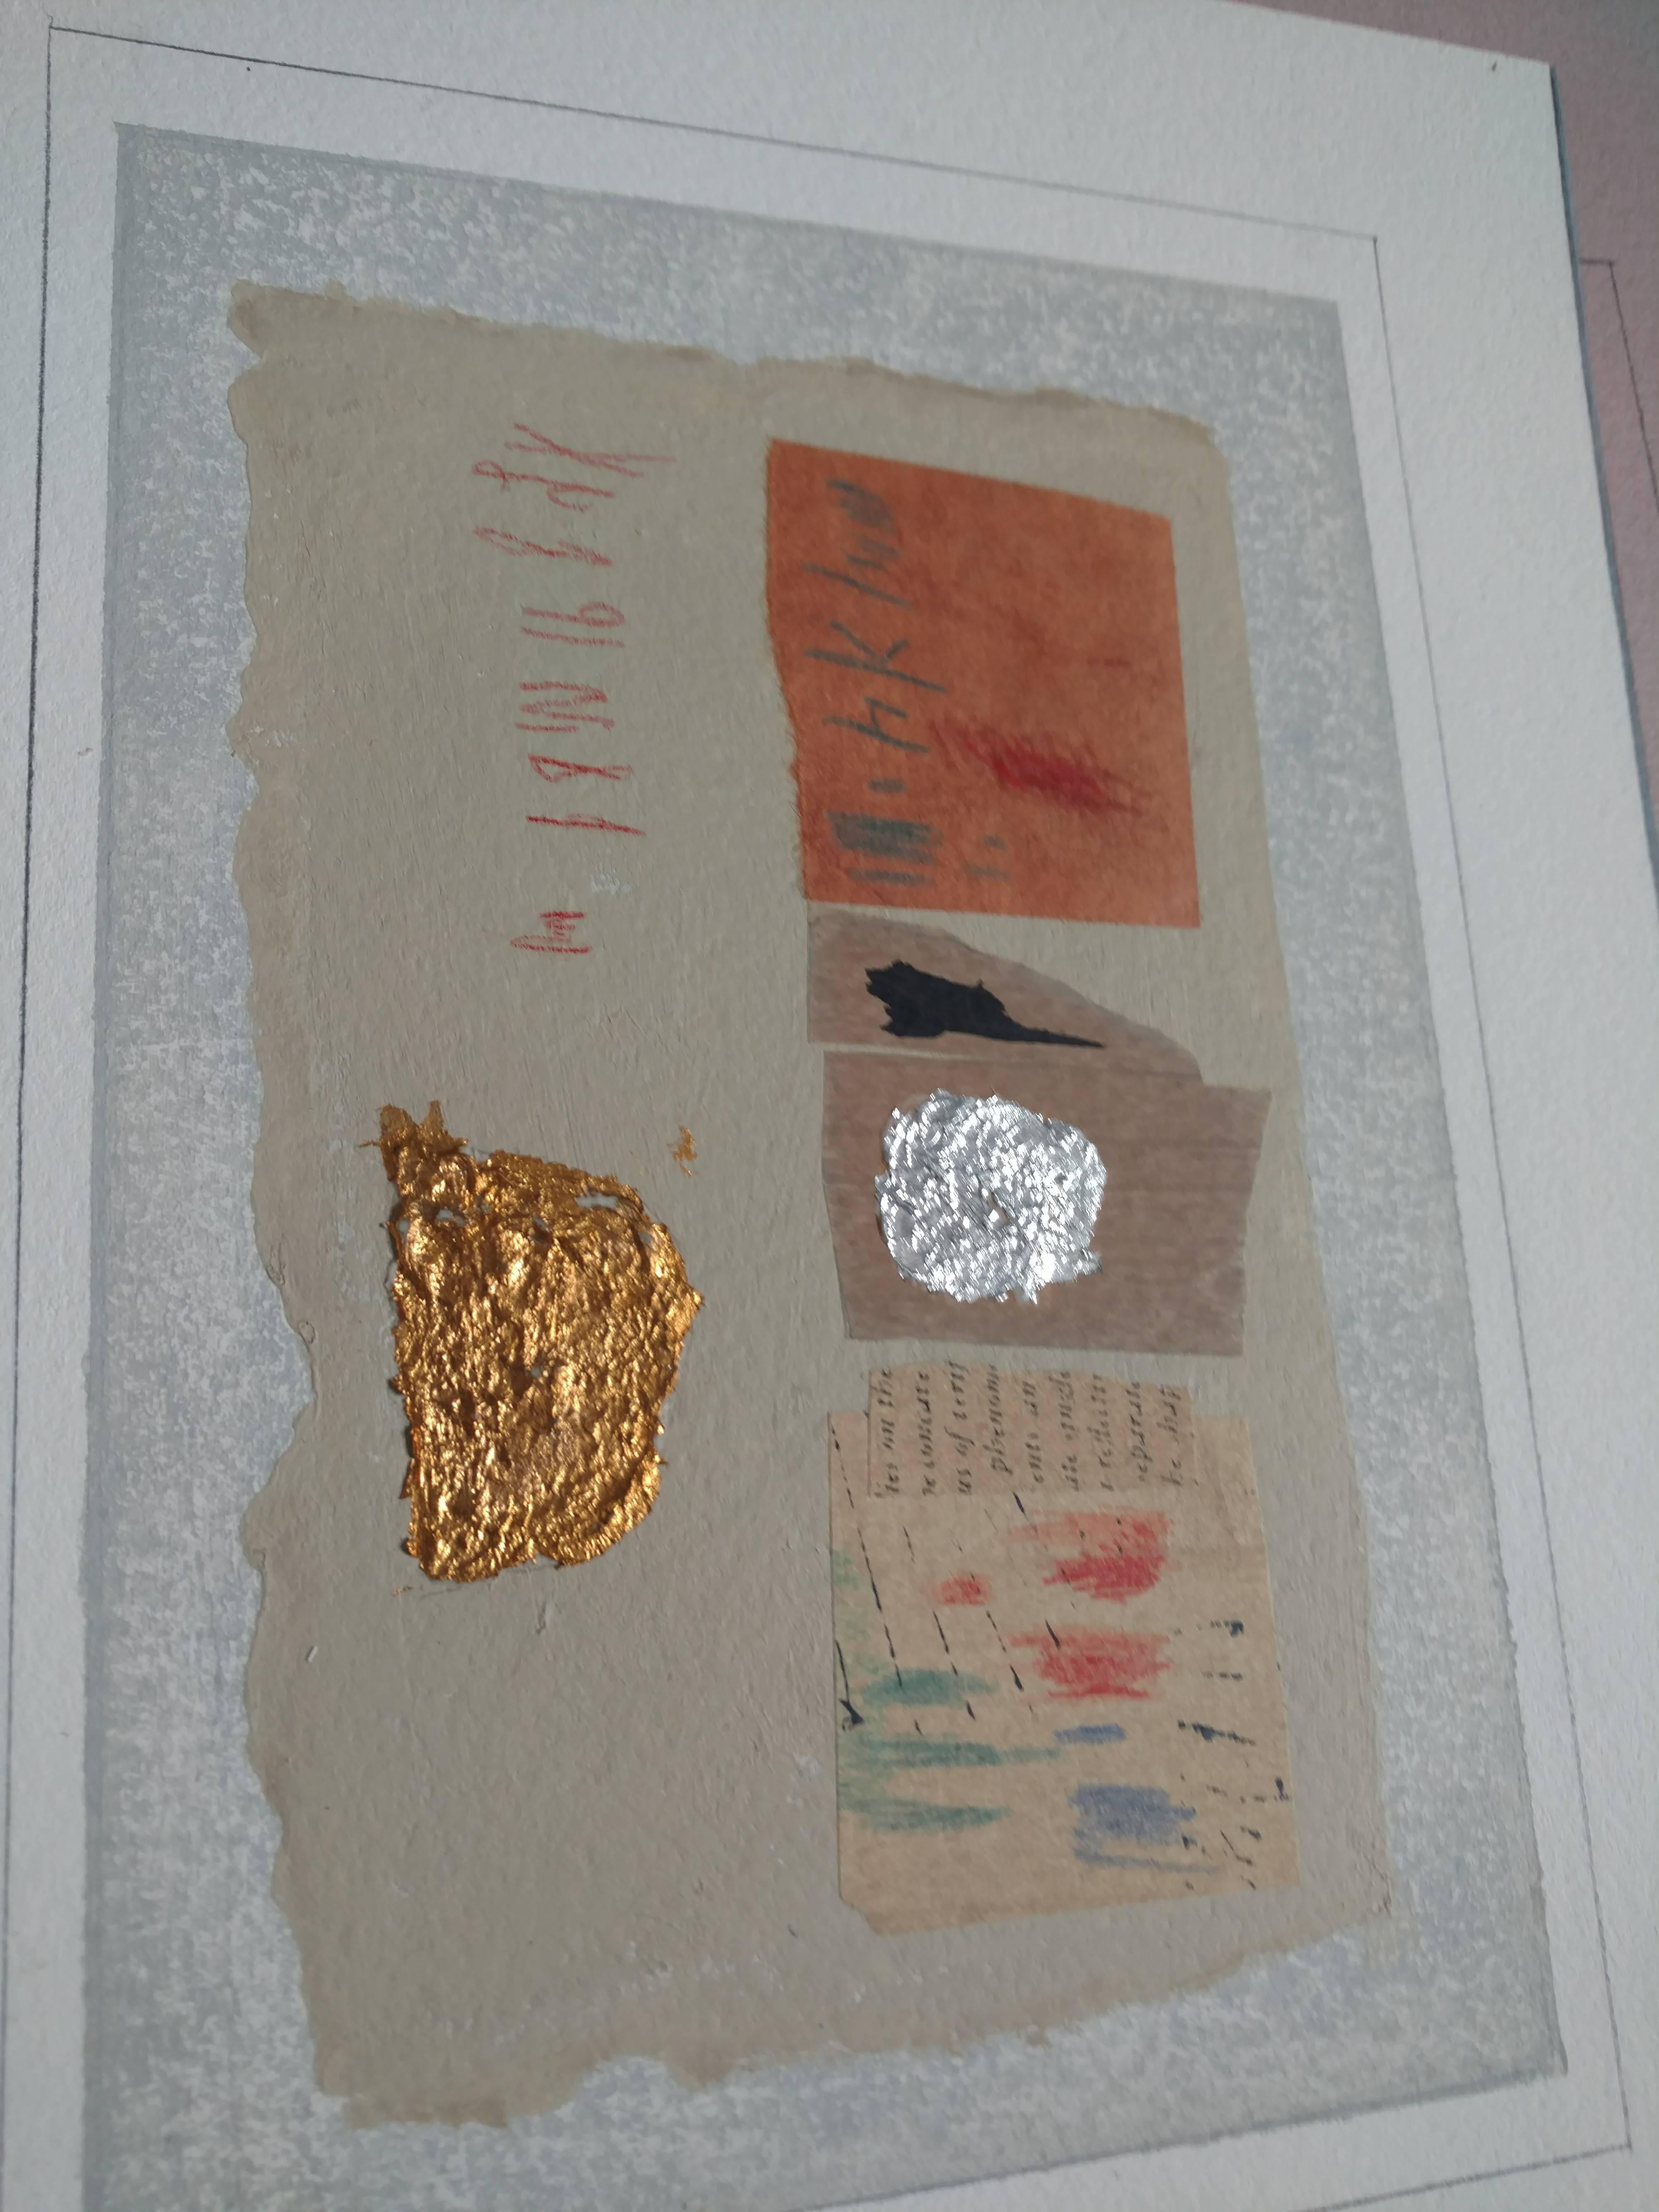 Mixed Media Abstract Collage, Gold leaf, silver lear, torn paper, drawings and painting.
Enid Munroe is an artist and teacher who is well known regionally for her paintings, works on paper and assemblage series. She has been included in numerous